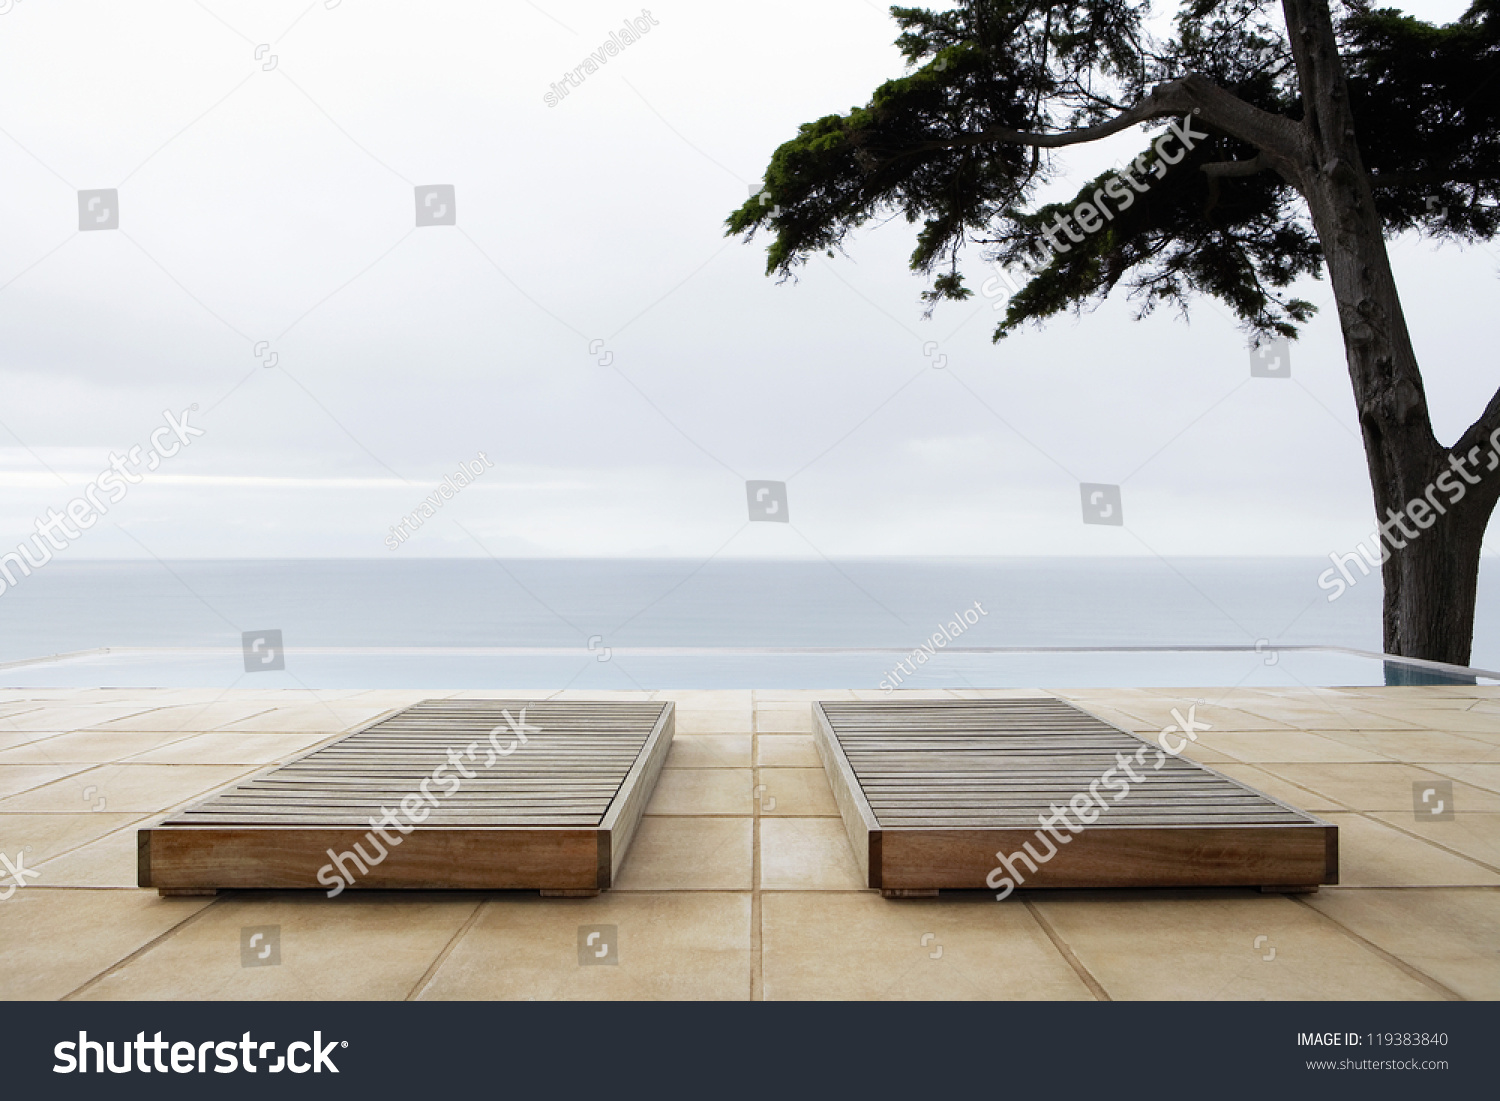 Two sun beds by infinity pool overlooking sea #119383840